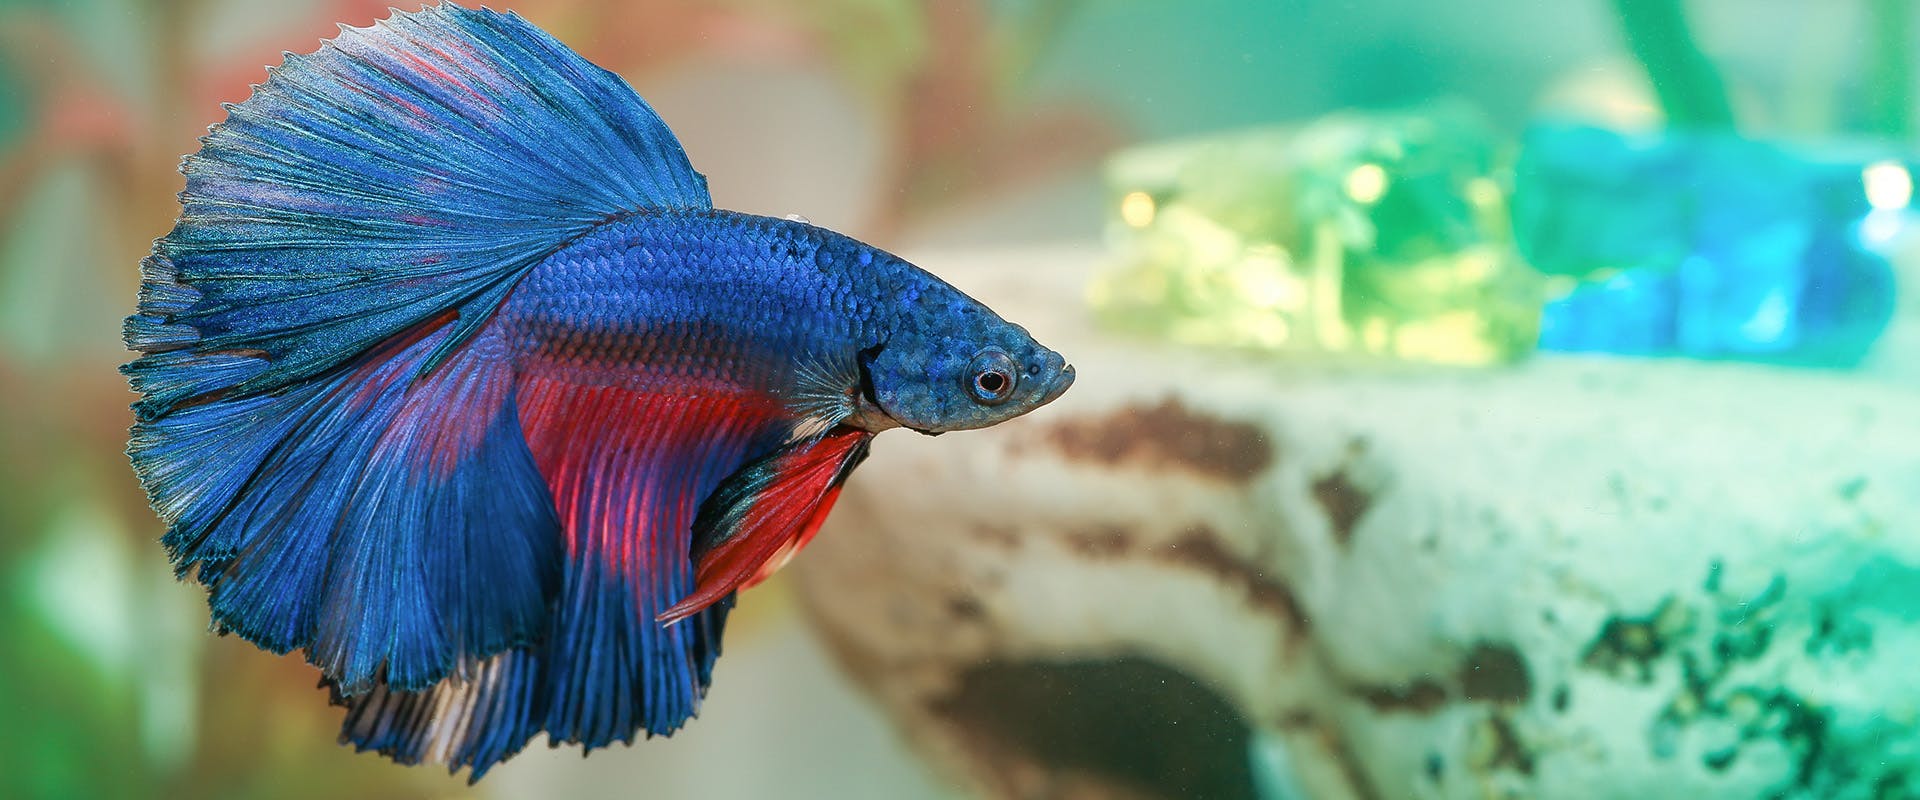 A blue and red betta fish swimming in a tank